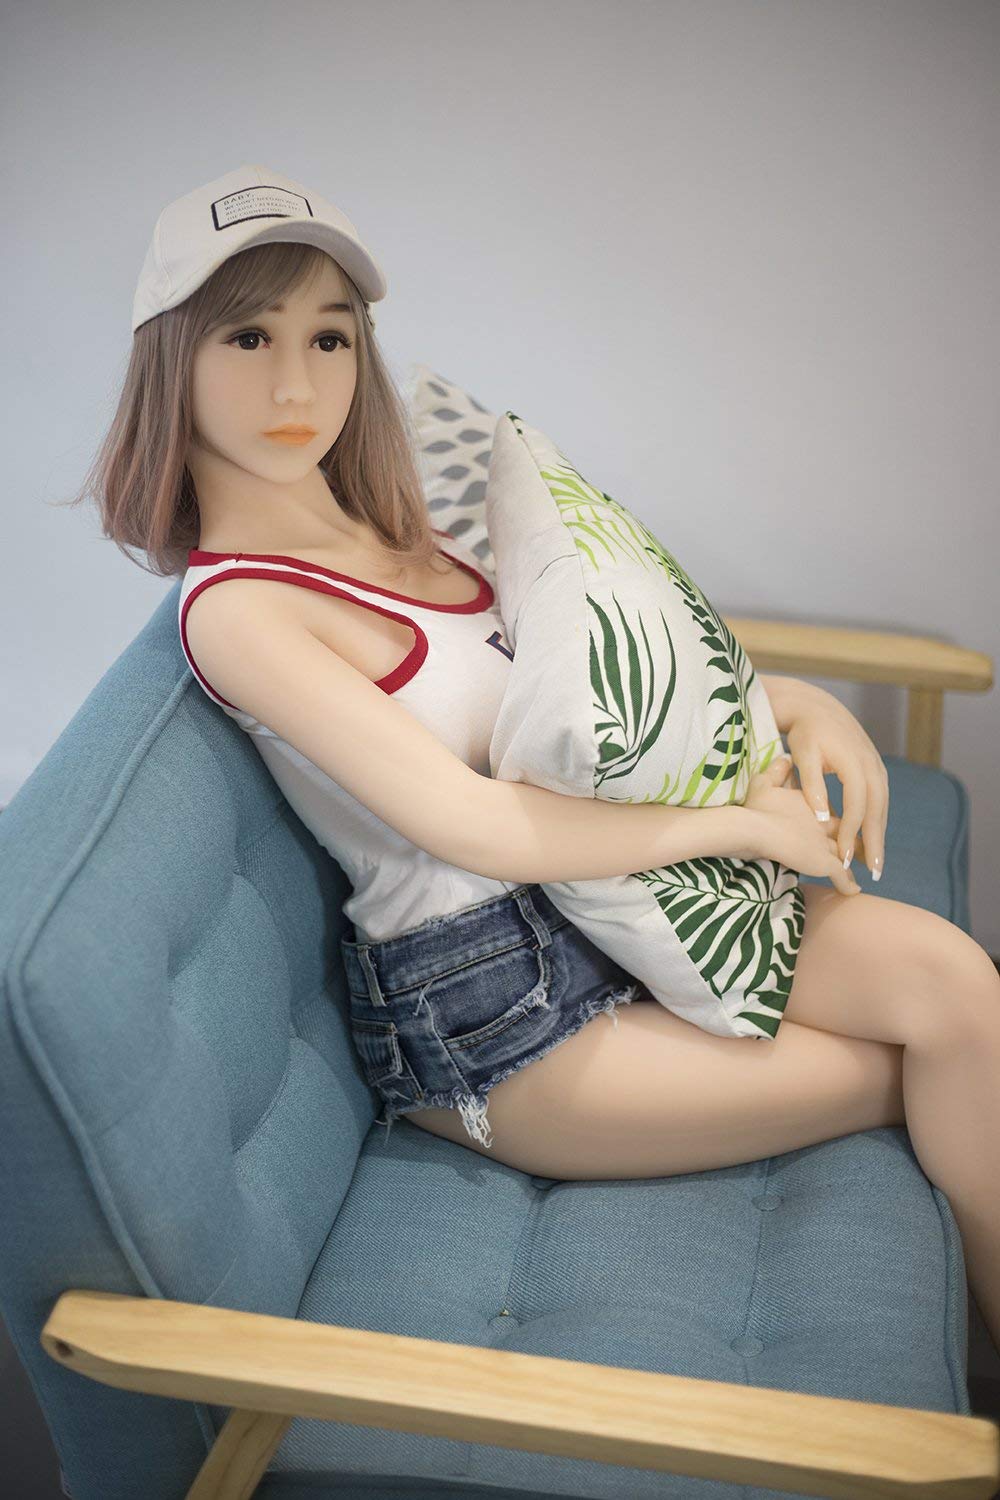 Life Size Sexy Love Doll Model for Adult Play - Maria